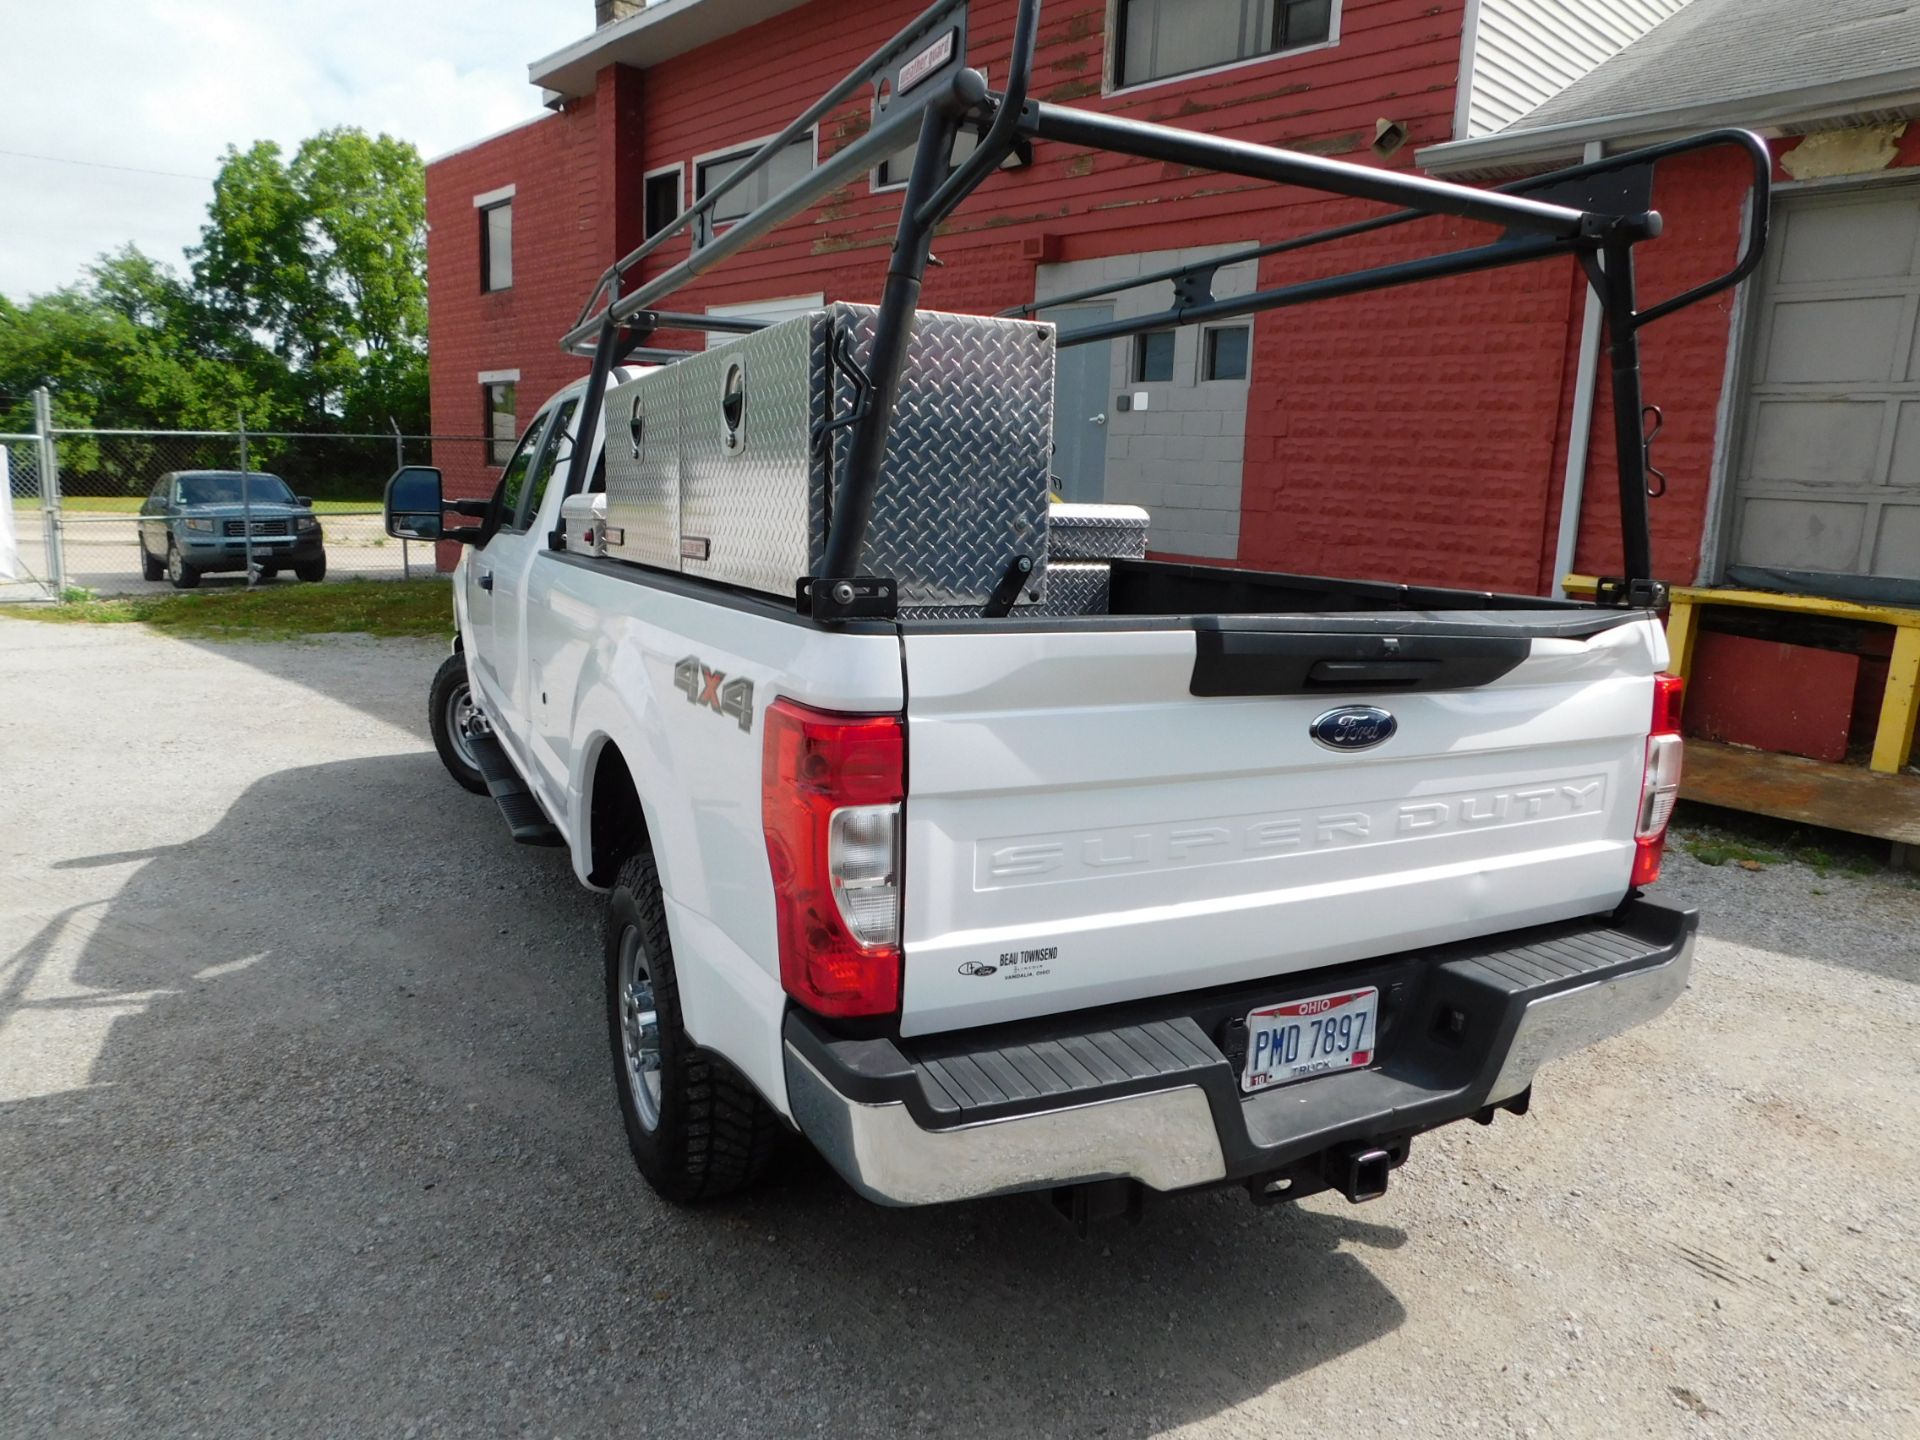 2020 Ford F-250 XL Etended Cab Pick-up Truck, Gas Engine, 4x4, PW, PL, AC, Trailer Brake Control, - Image 7 of 31